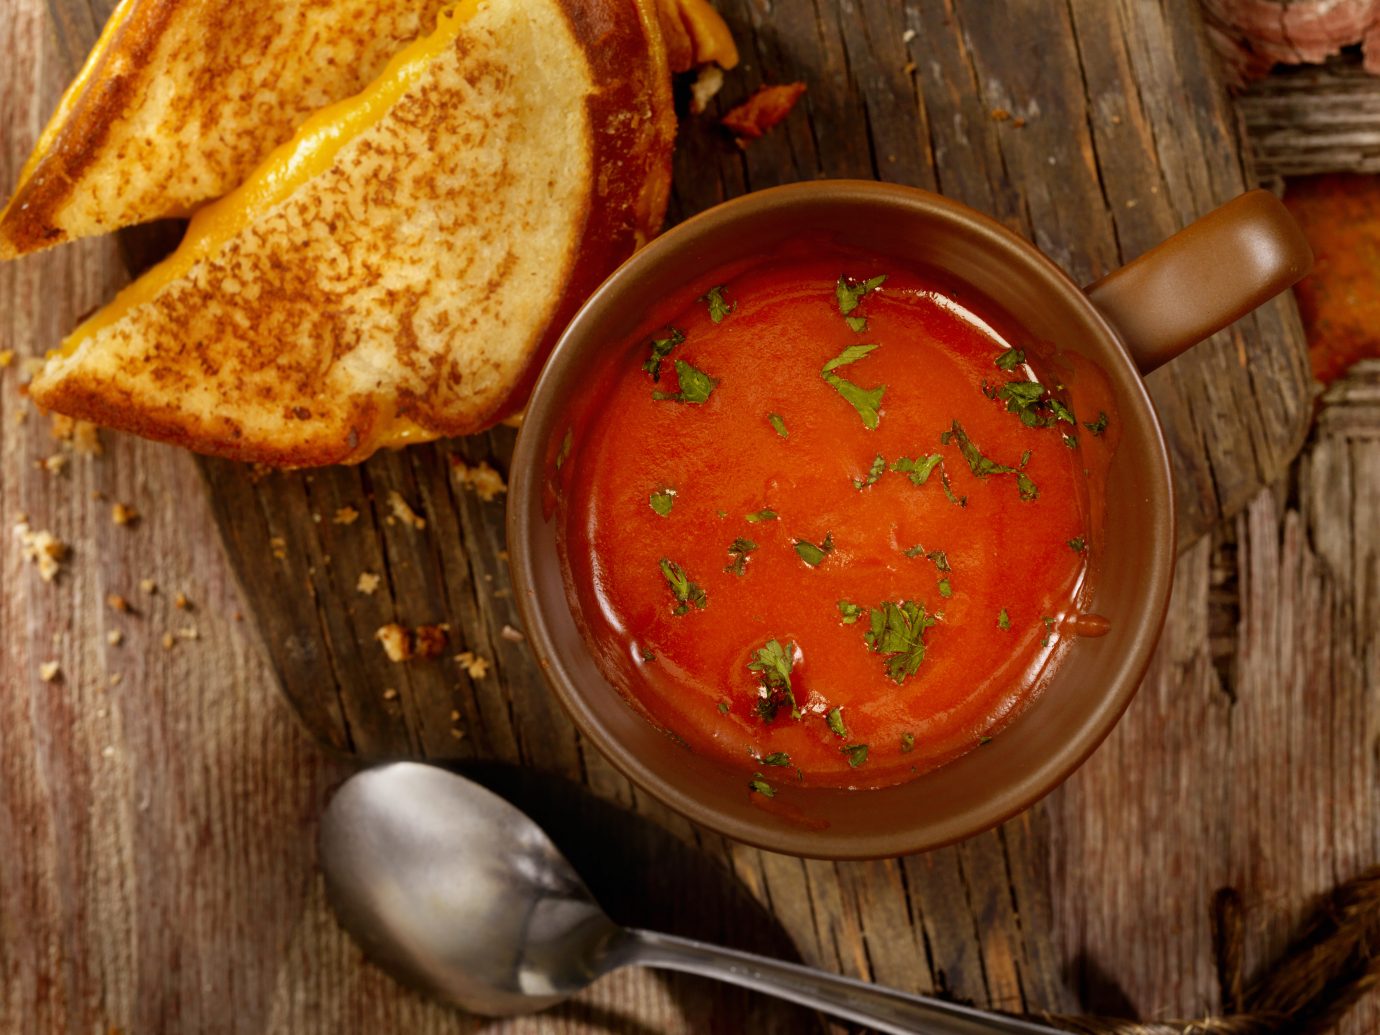 Tomato Soup with Grilled Cheese Sandwich